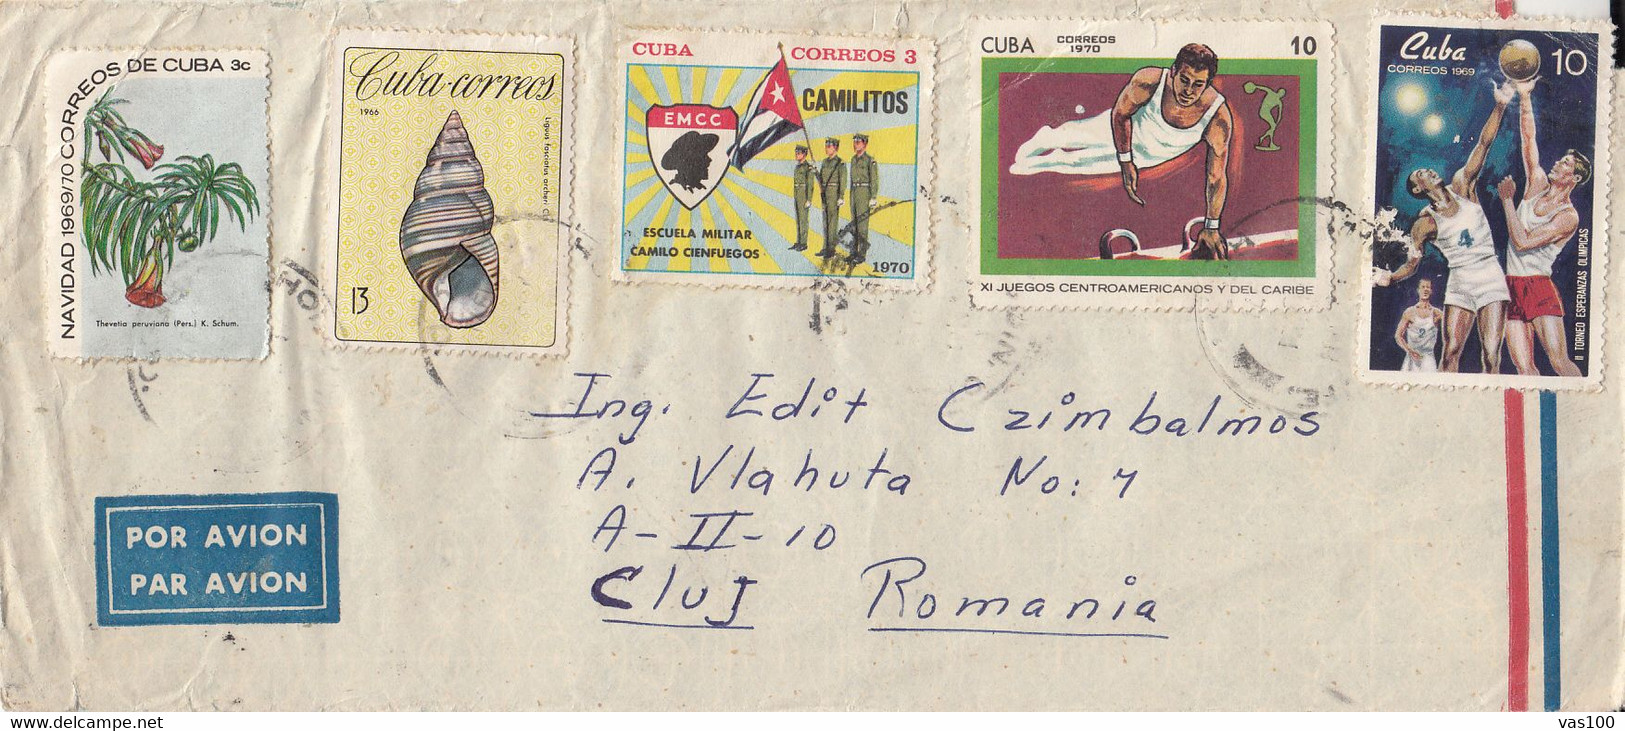 FLOWER, SHELL, MILITARY SCHOOL, GYMNASTICS, BASKETBALL, STAMPS ON COVER, 1970, CUBA - Covers & Documents